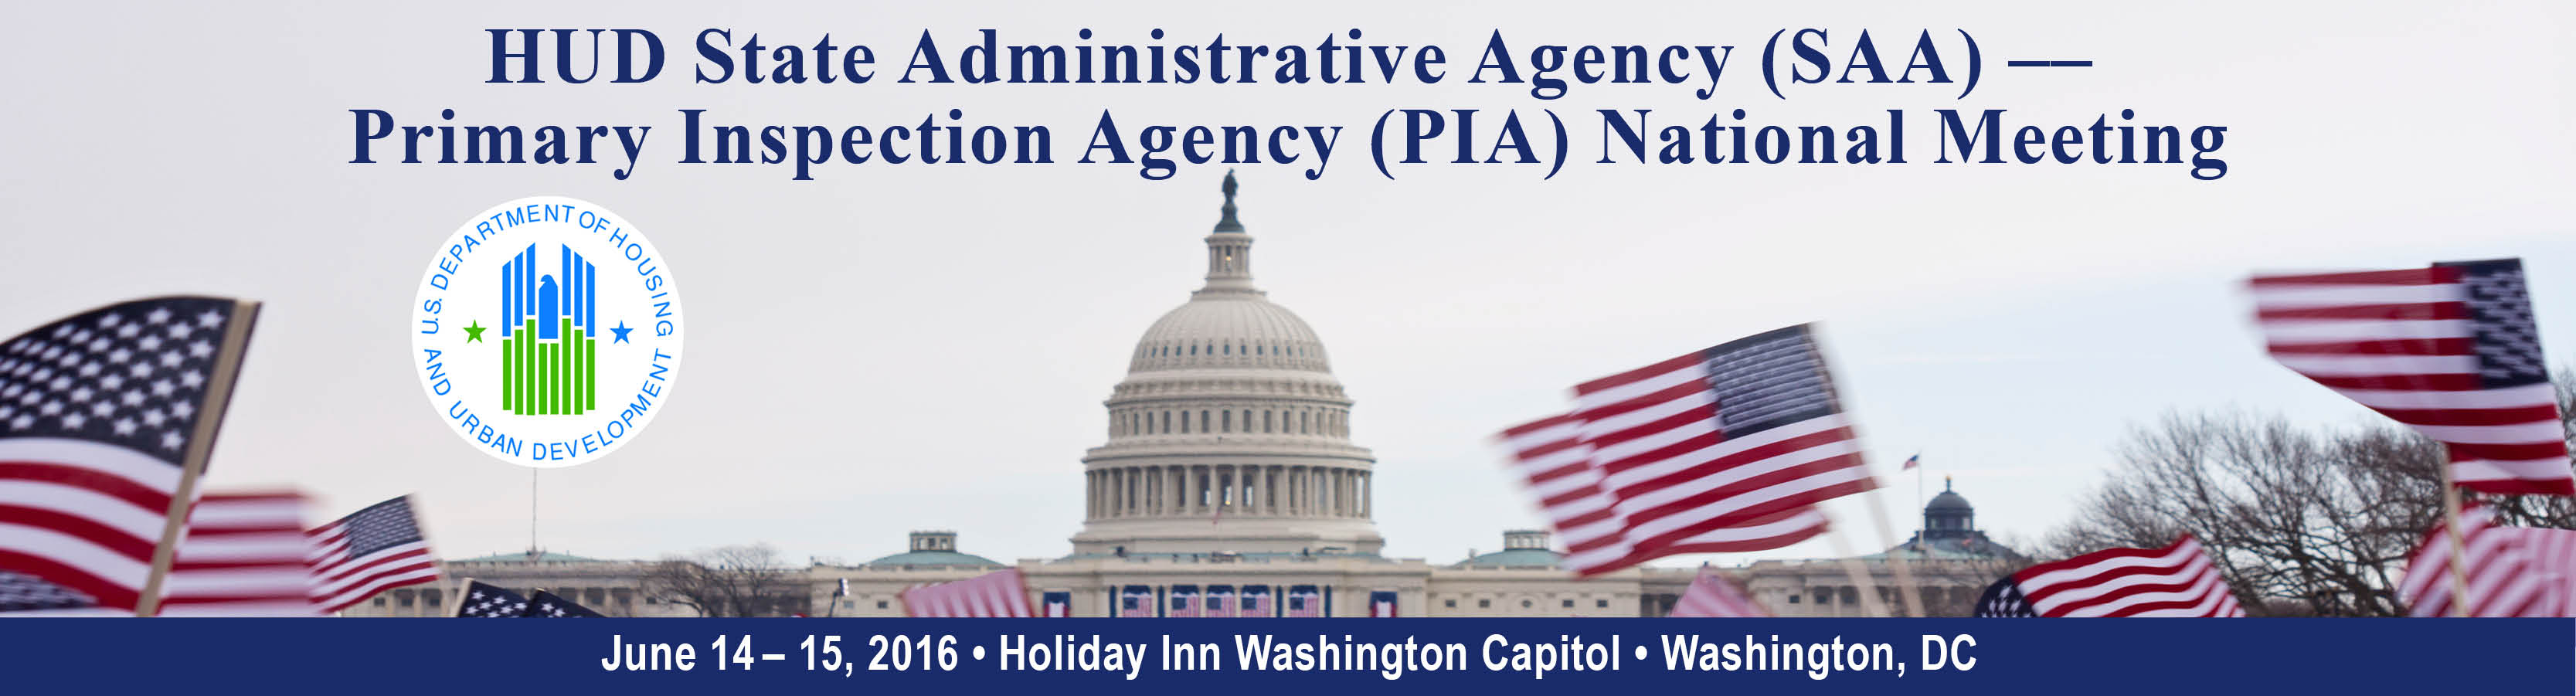 The U.S. Department of Housing and Urban Development (HUD), Office of Manufactured Housing Programs is pleased to announce that the State Administrative Agency — Primary Inspection Agency National Meeting (2016 SAA-PIA Meeting) will take place Tuesday, June 14 through Wednesday, June 15, 2016, at the Holiday Inn Washington Capitol, located at 550 C Street, S.W., Washington, D.C.